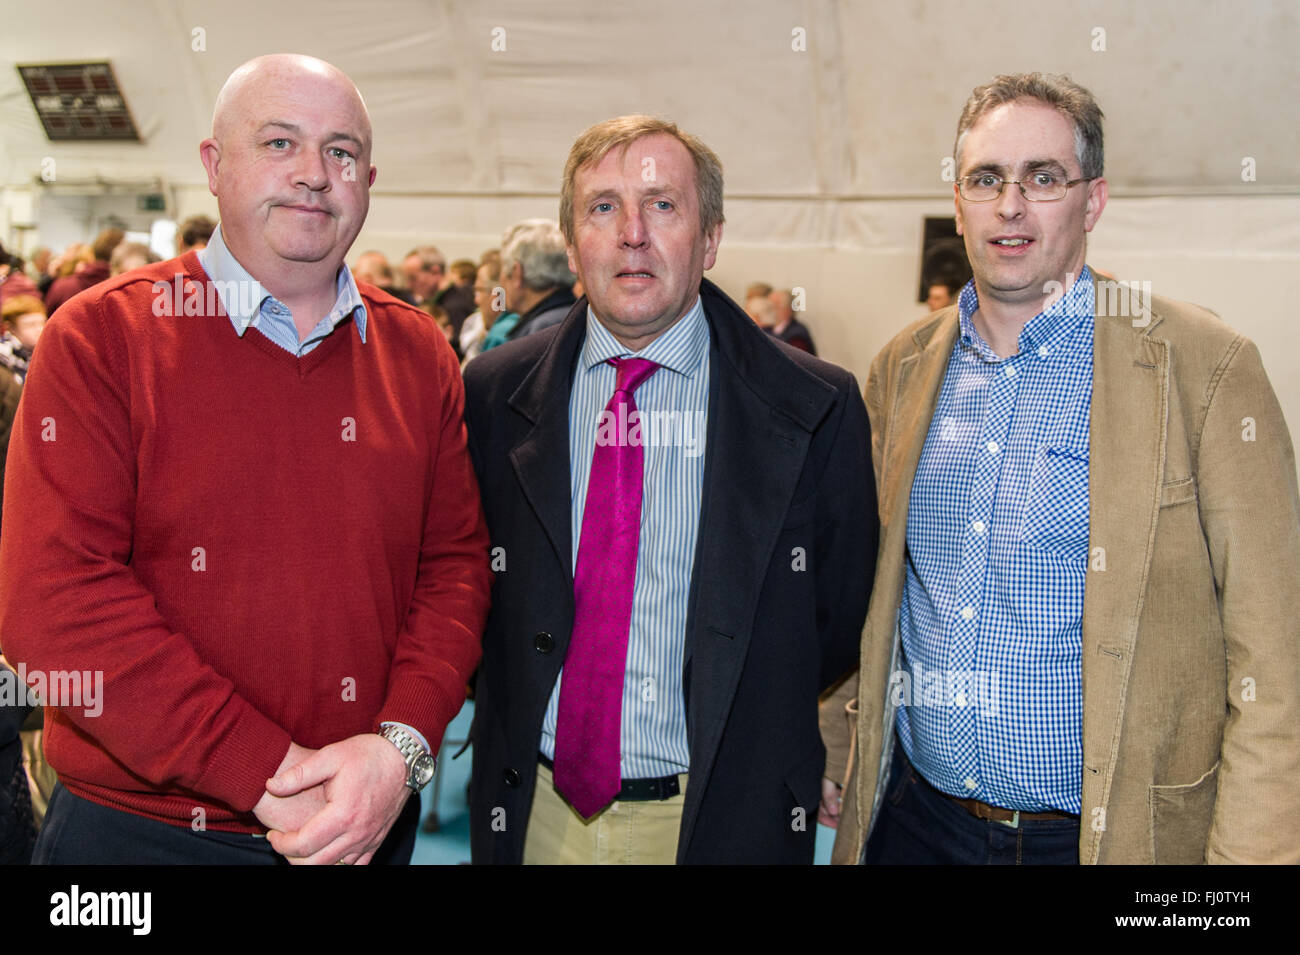 Ballincollig, Ireland. 27th February, 2016. Pictured at the 2016 General Election count in Coláiste Choilm, Ballincollig were, from left: Michael Breen, Fine Gael Constituency Chairman for Cork North West; Fine Gael Candidate Michael Creed and Fergal Walsh from Charleville. Credit: AG News/Alamy Live News Stock Photo